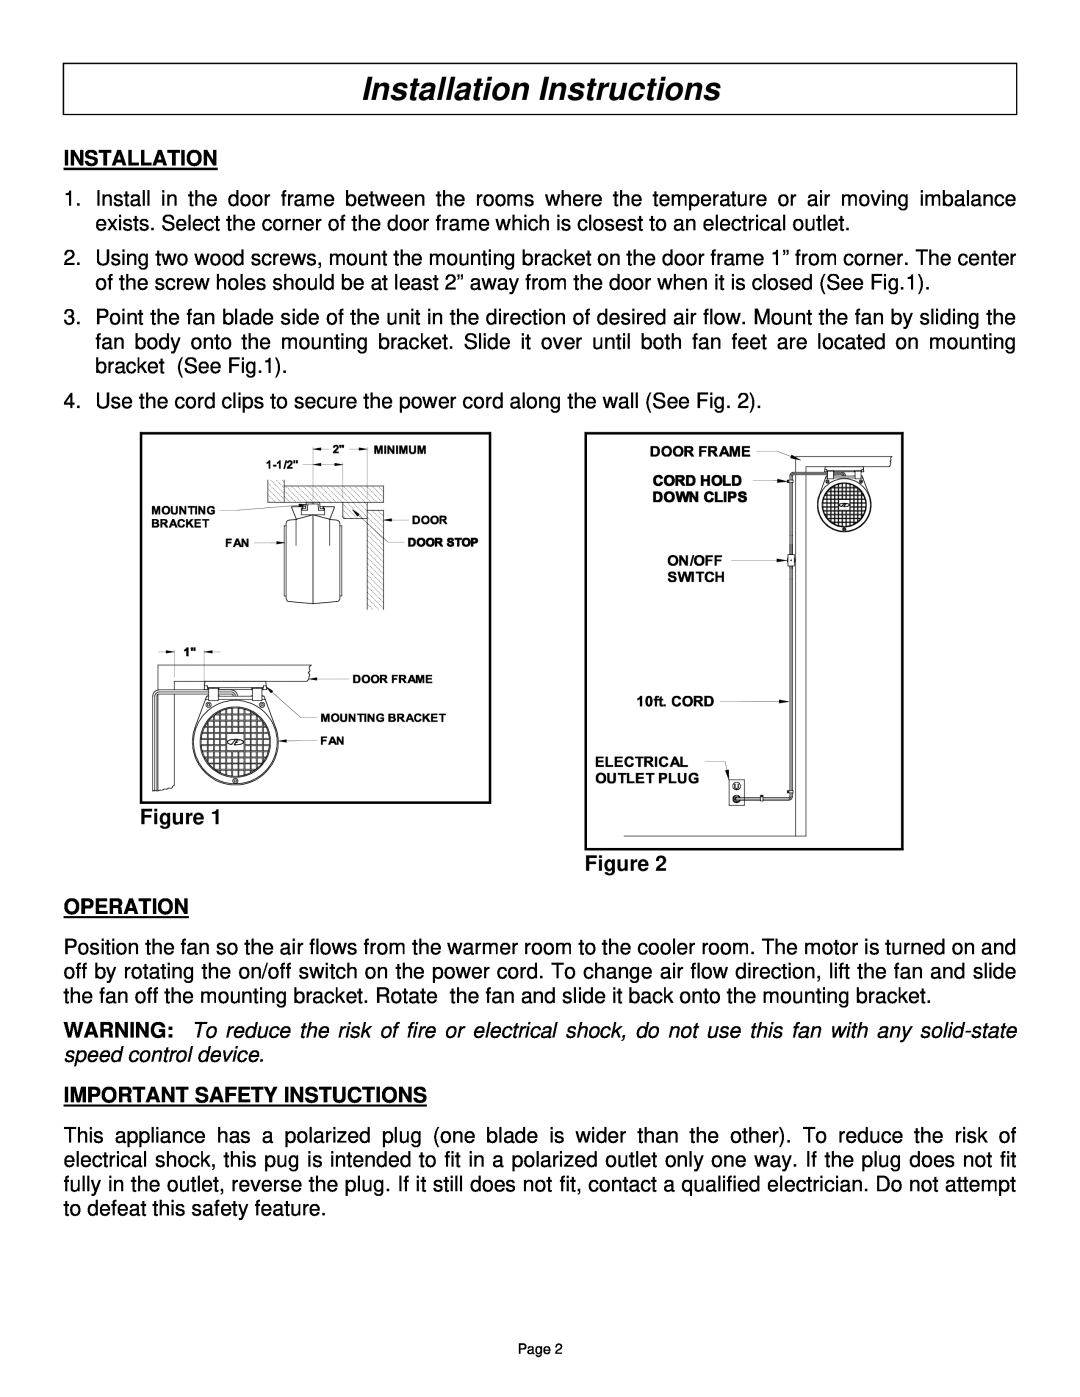 Field Controls RF-1 instruction manual Installation Instructions, Figure Figure OPERATION, Important Safety Instuctions 